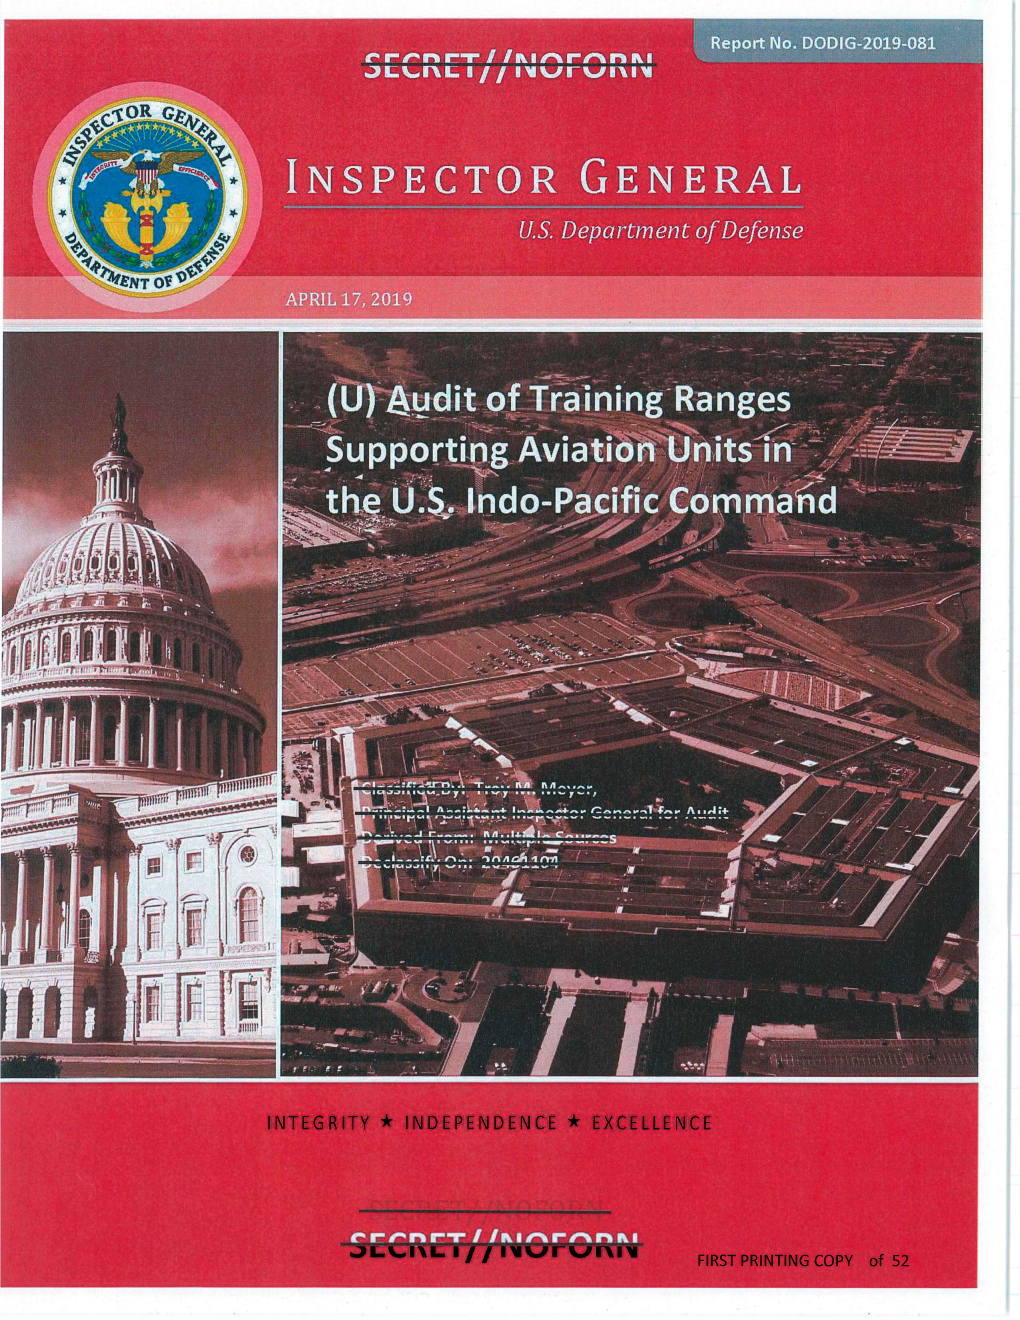 (U) Audit of Training Ranges Supporting Aviation Units in the U.S. Indo- Pacific Command